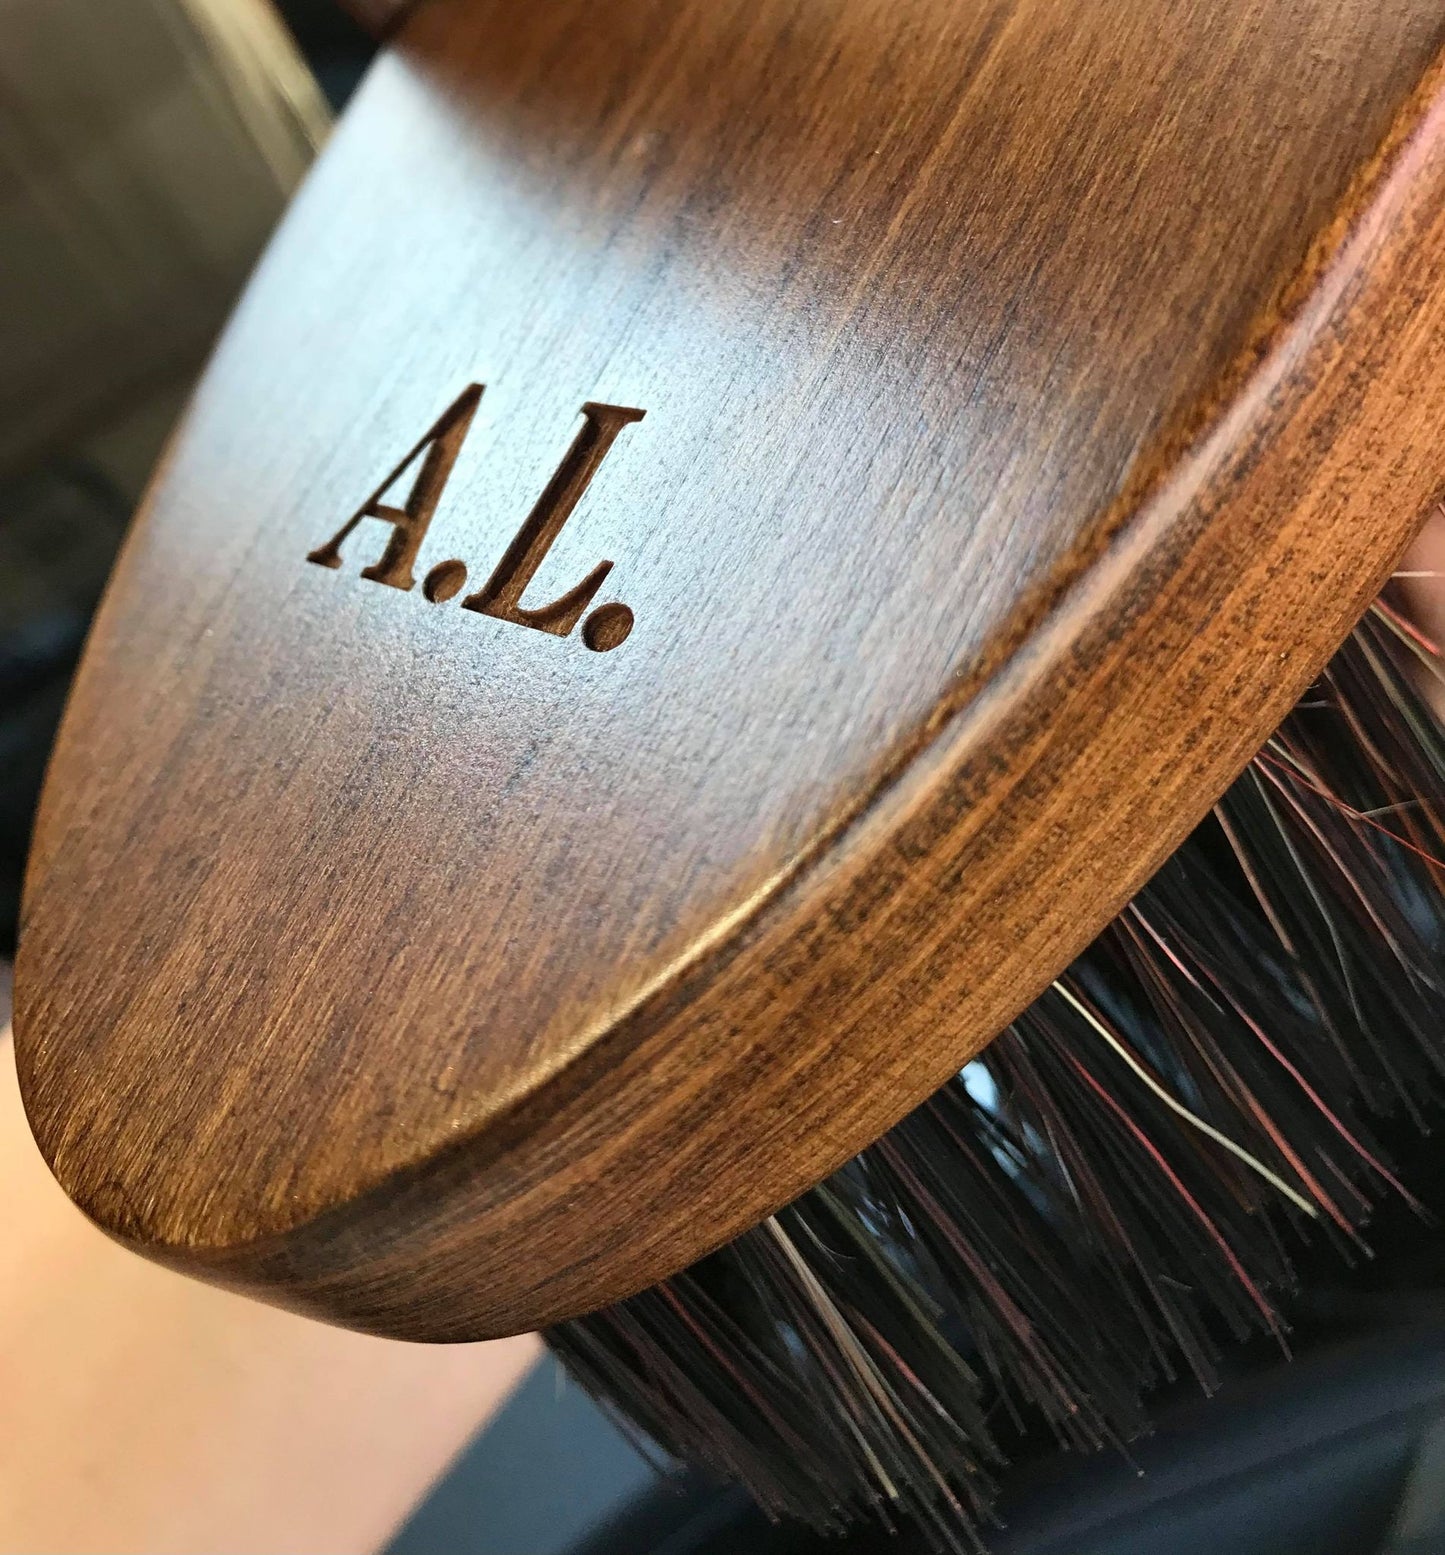 An example of the custom engraving available on the brushes in the kit.